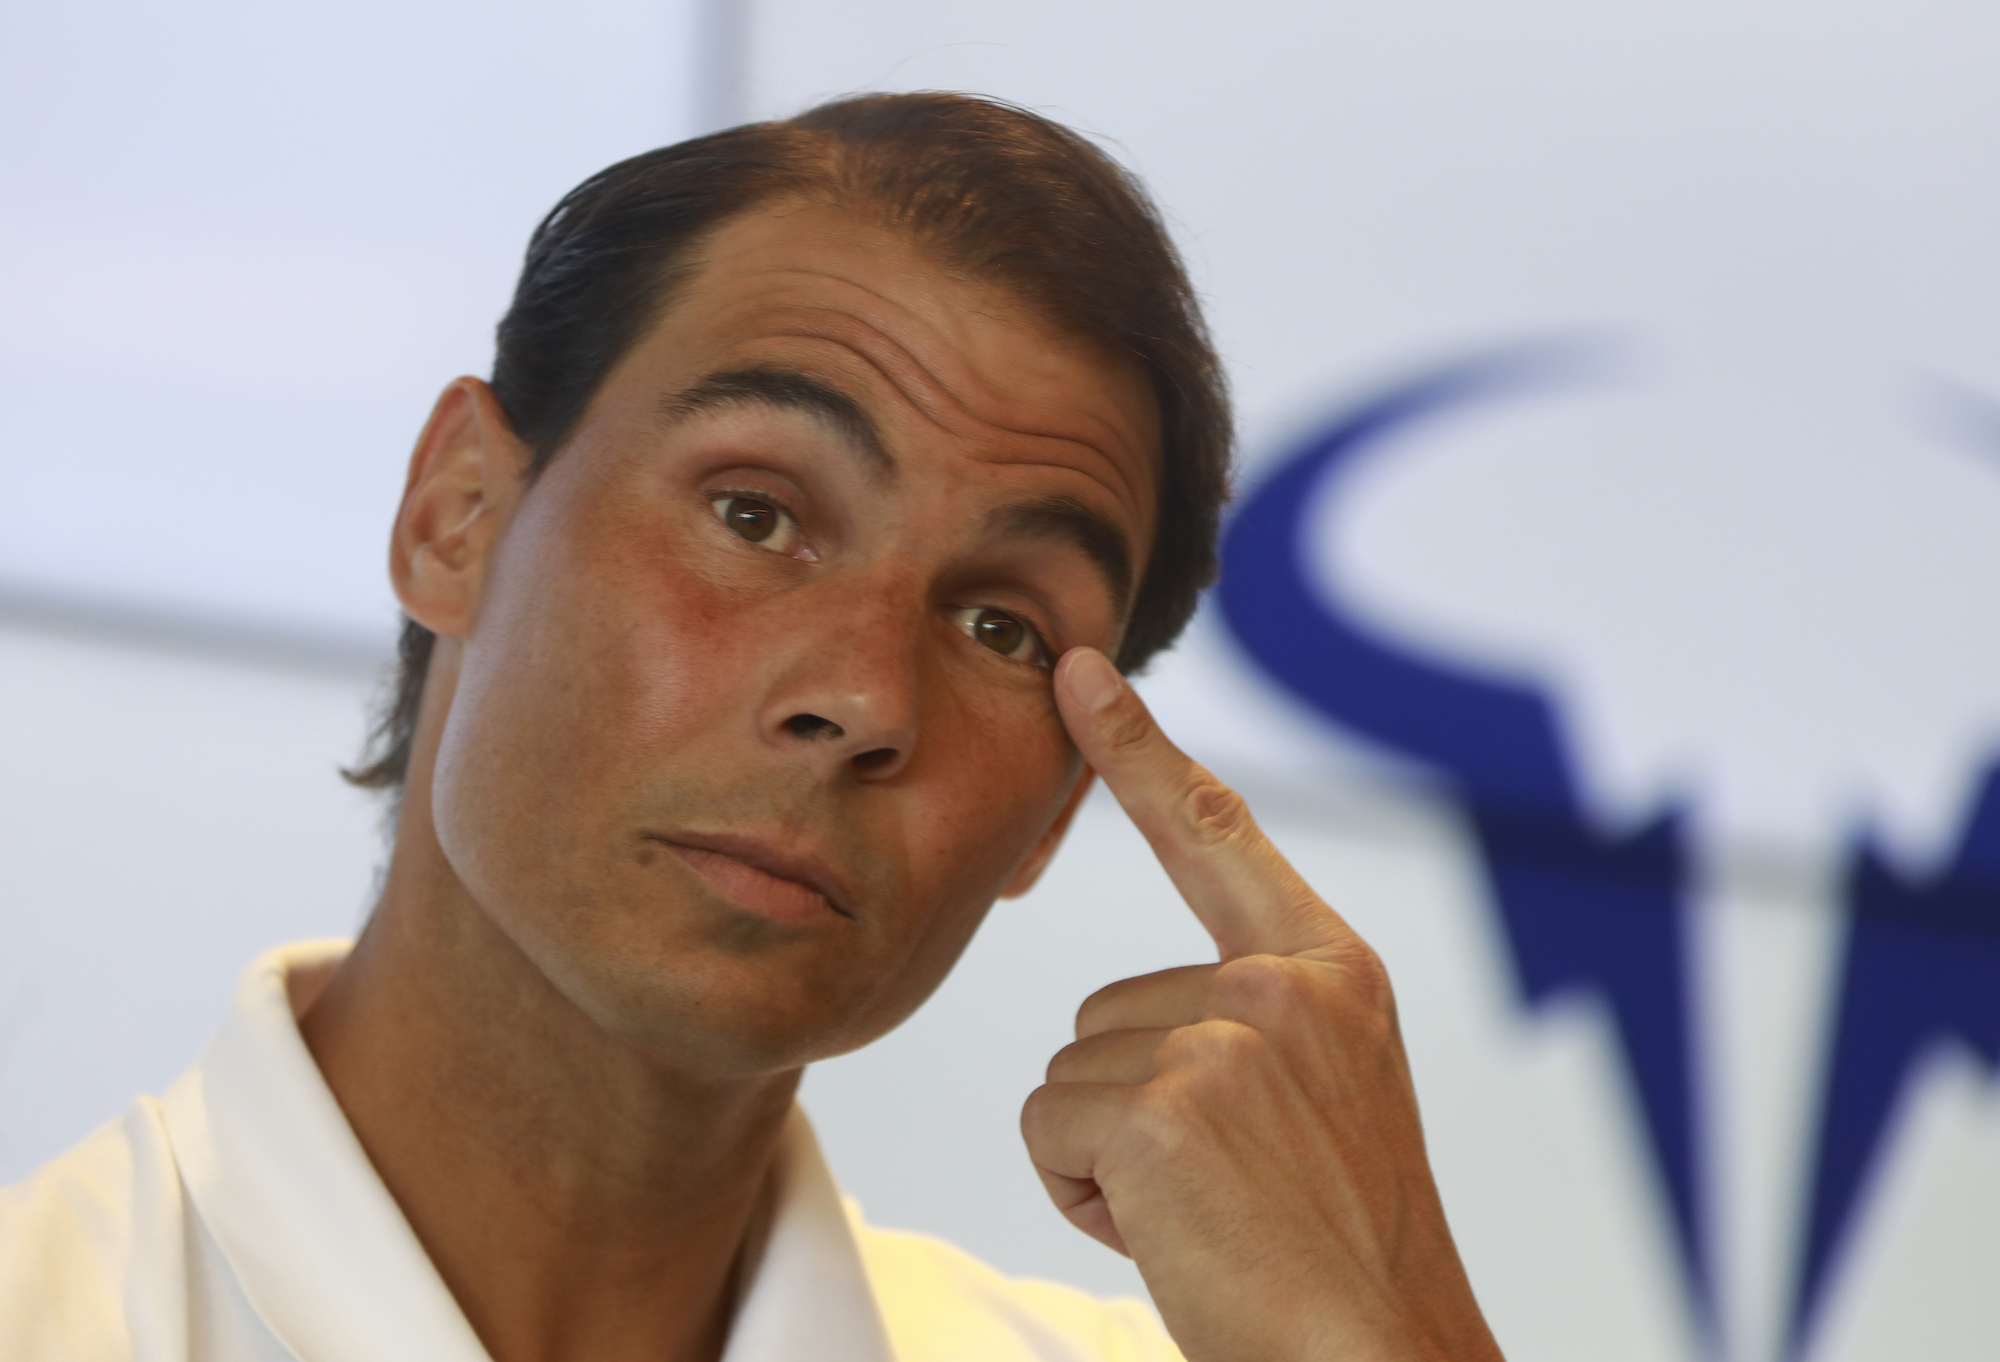 Rafael Nadal Will Be Out Of The French Open, And Out Of Tennis After